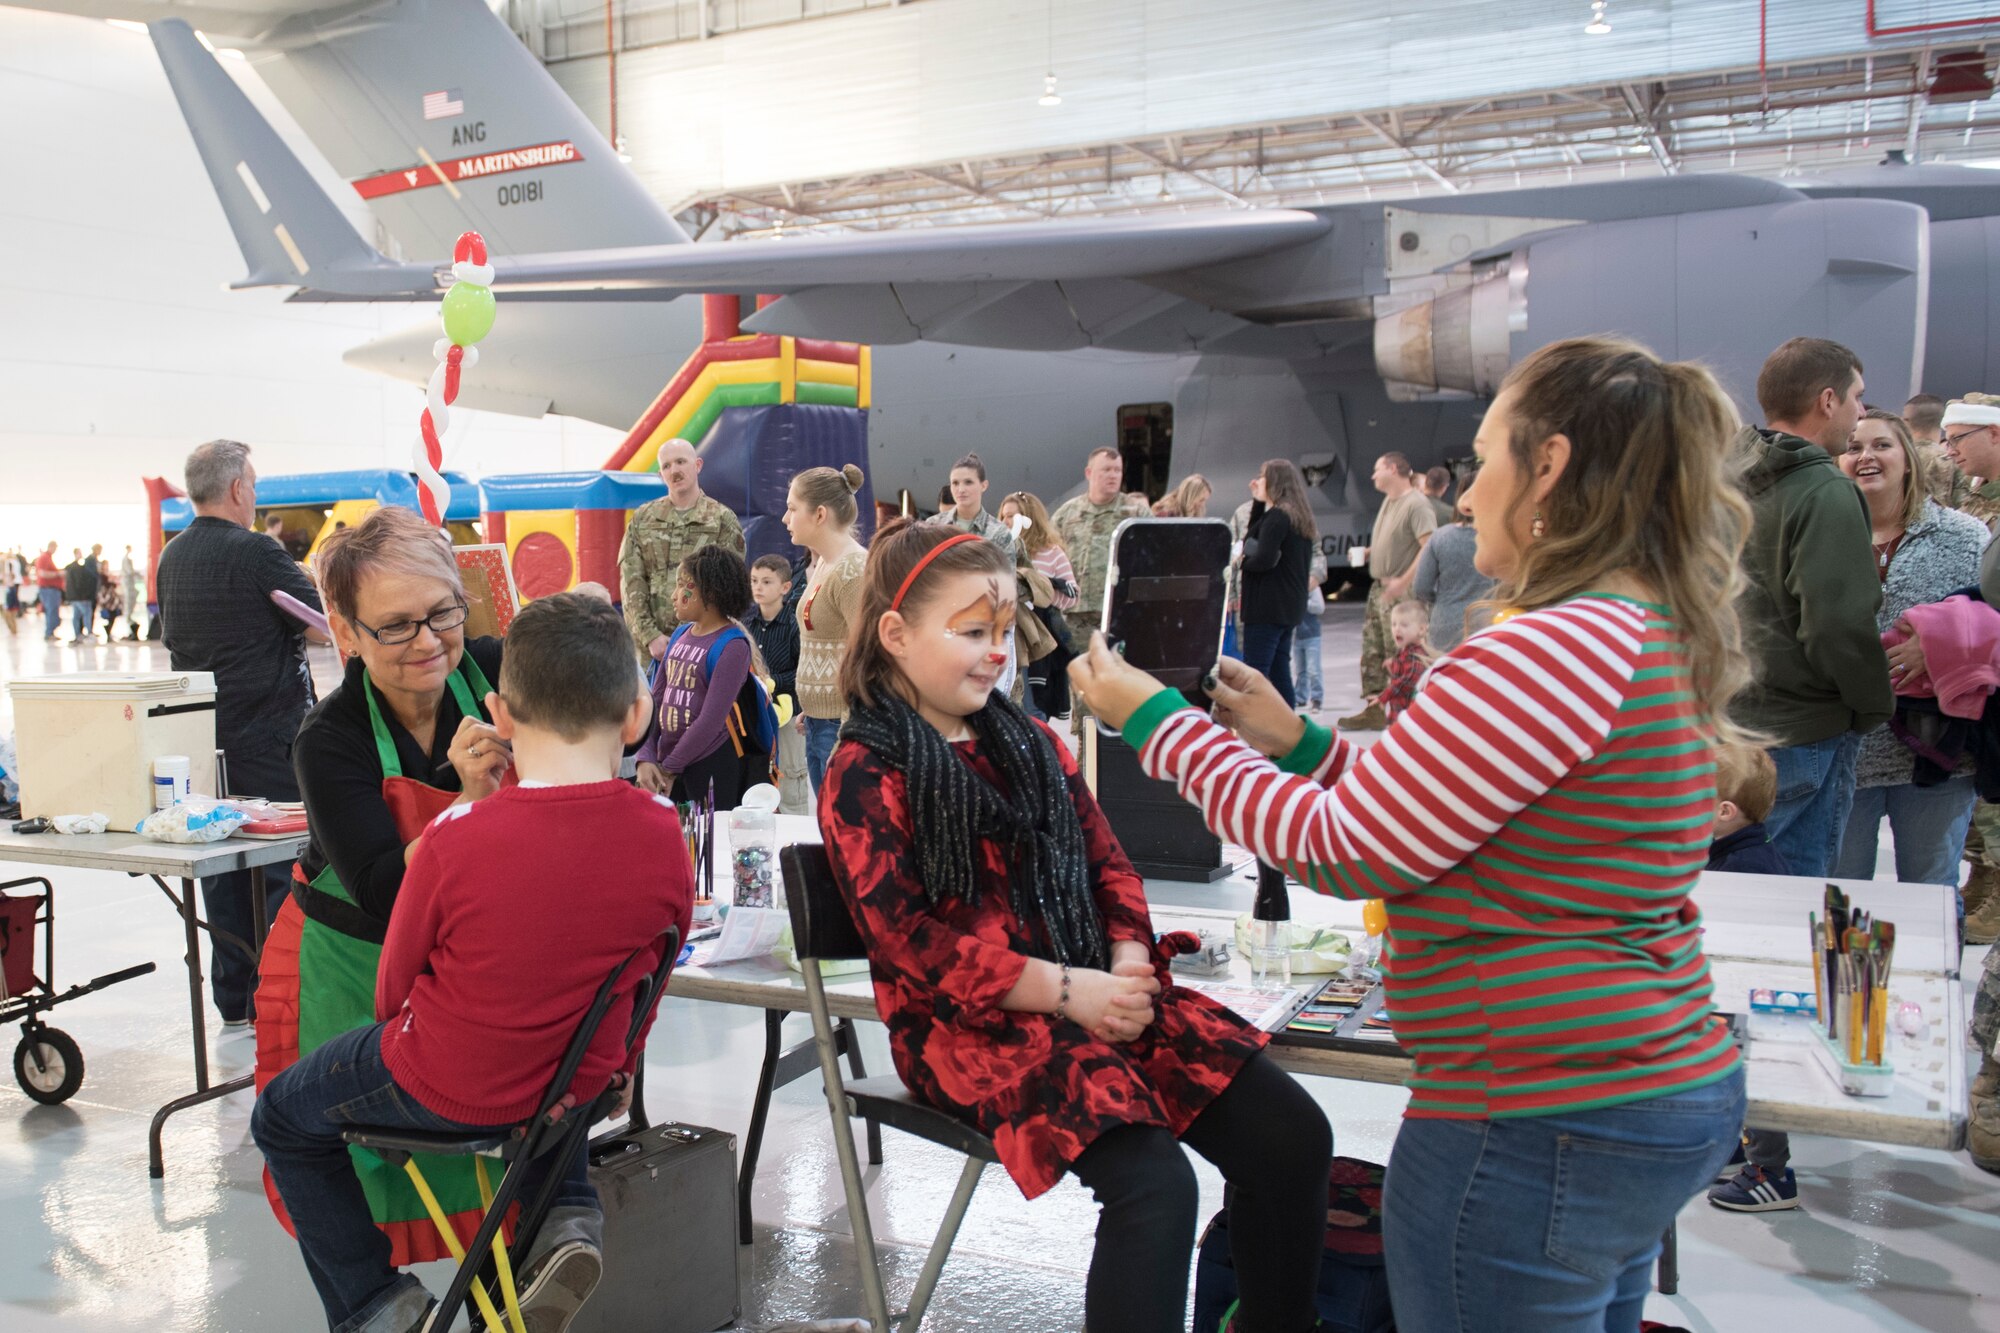 Children get their face painted at the 167th Airlift Wing family day event, Dec. 8, 2019.